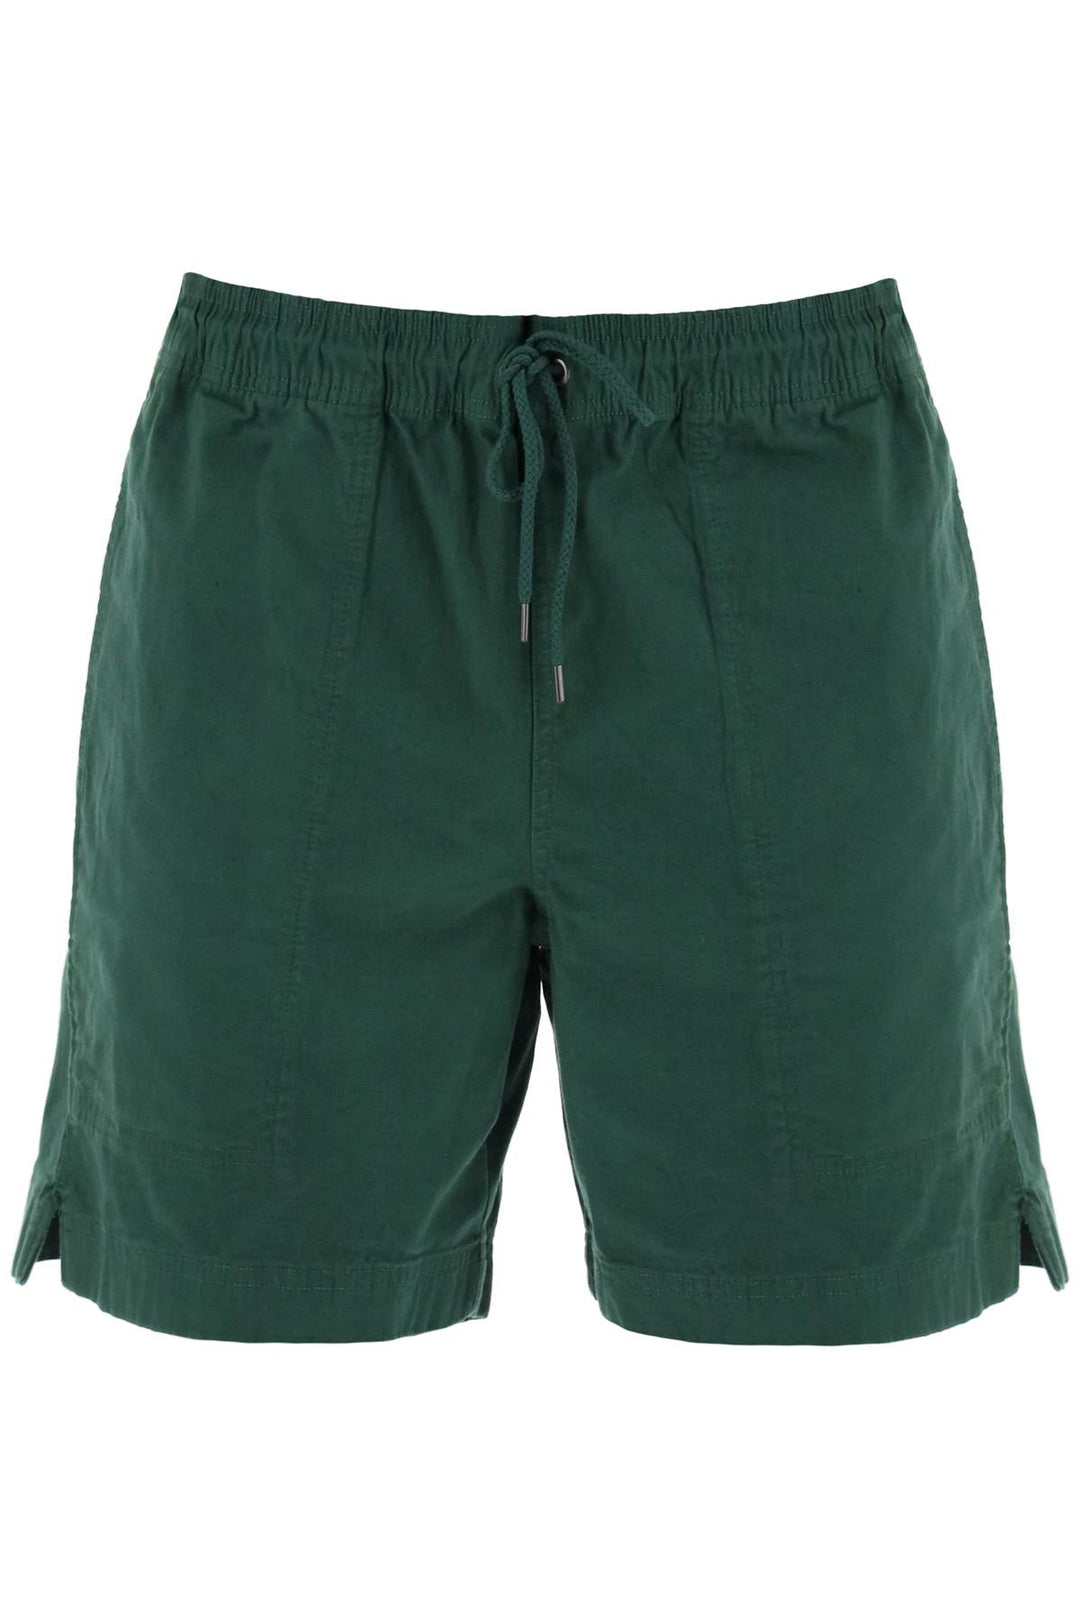 Filson Replace With Double Quotemountain Pull On Bermuda Granite Shorts   Verde